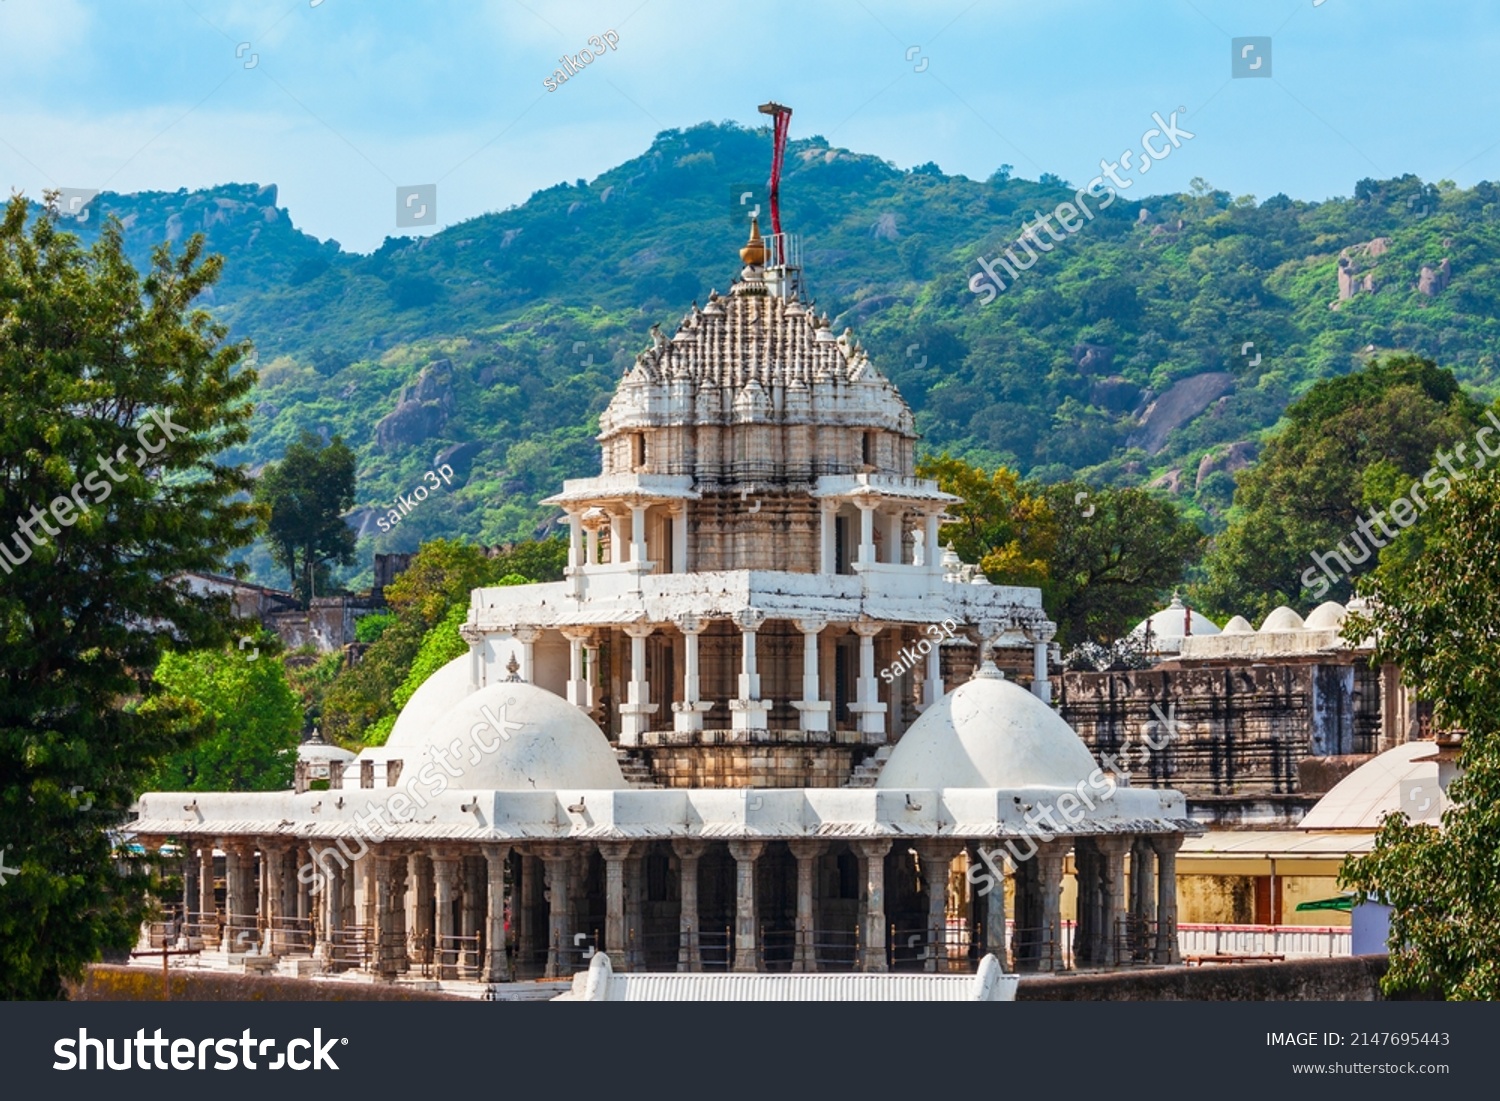 Dilwara or Delvada Temples are Jain temples in Mount Abu, a hill station in Rajasthan state, India #2147695443